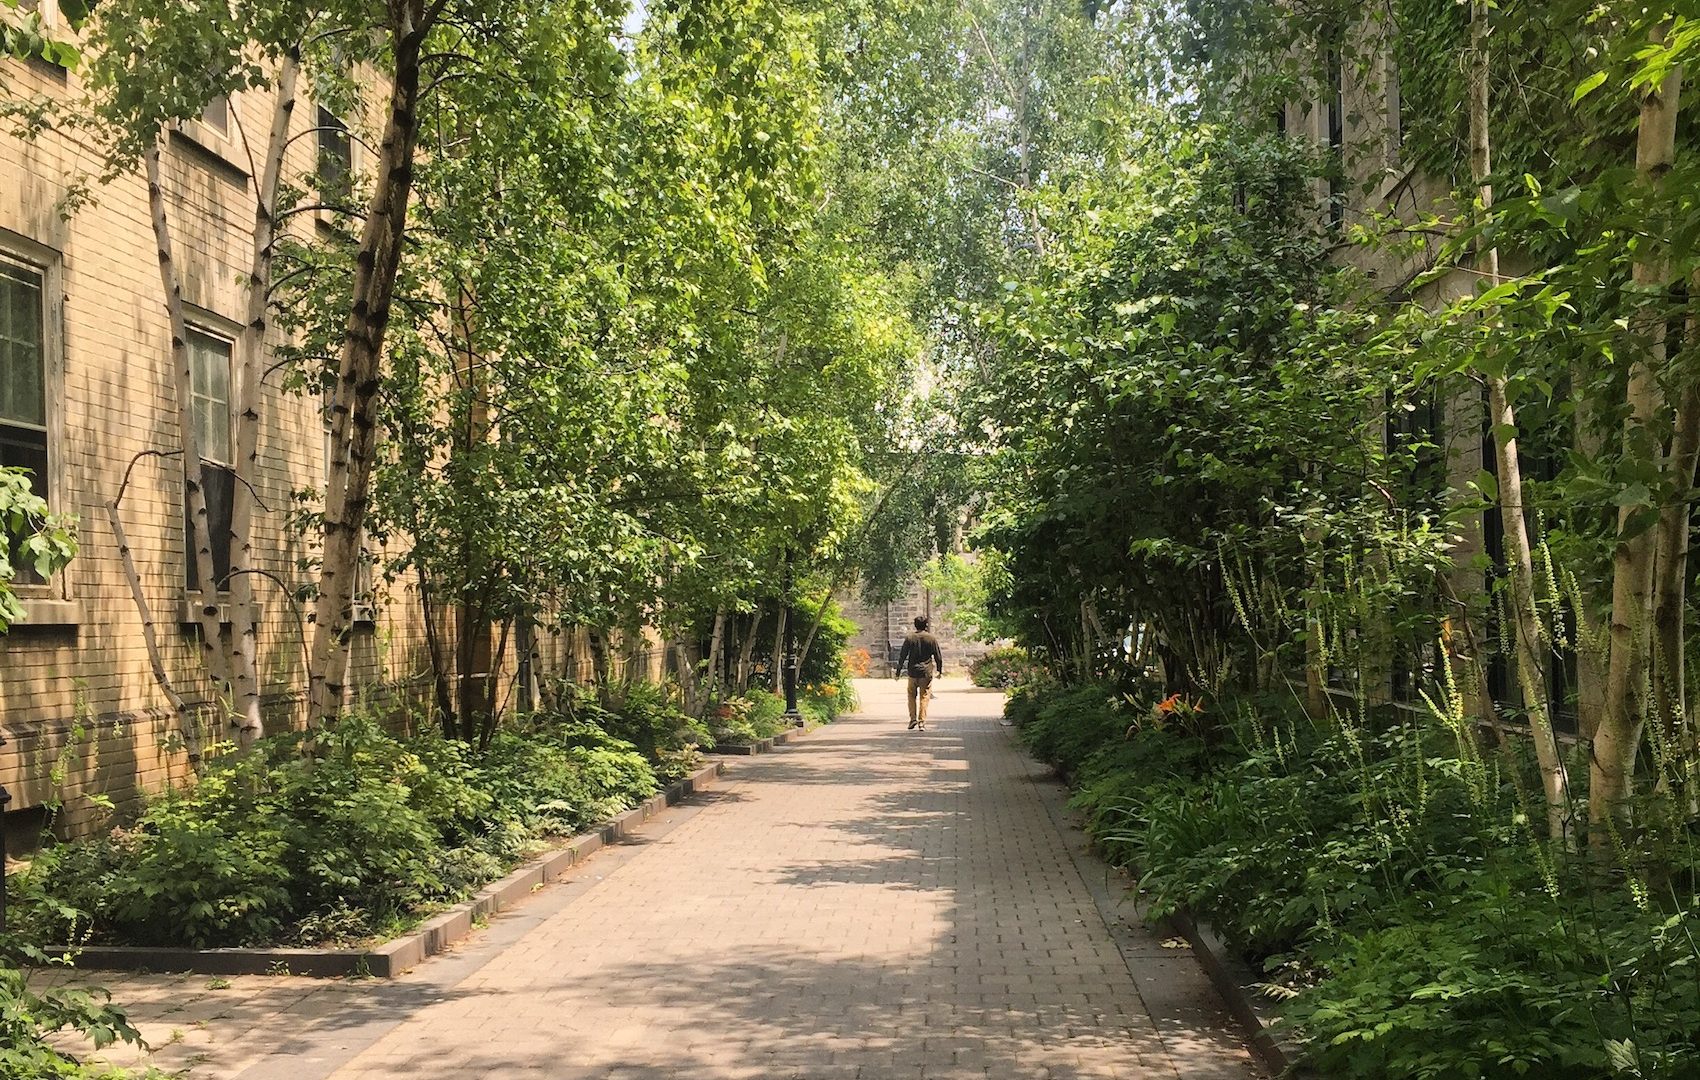 A picture of a person walking through a wooded walkway